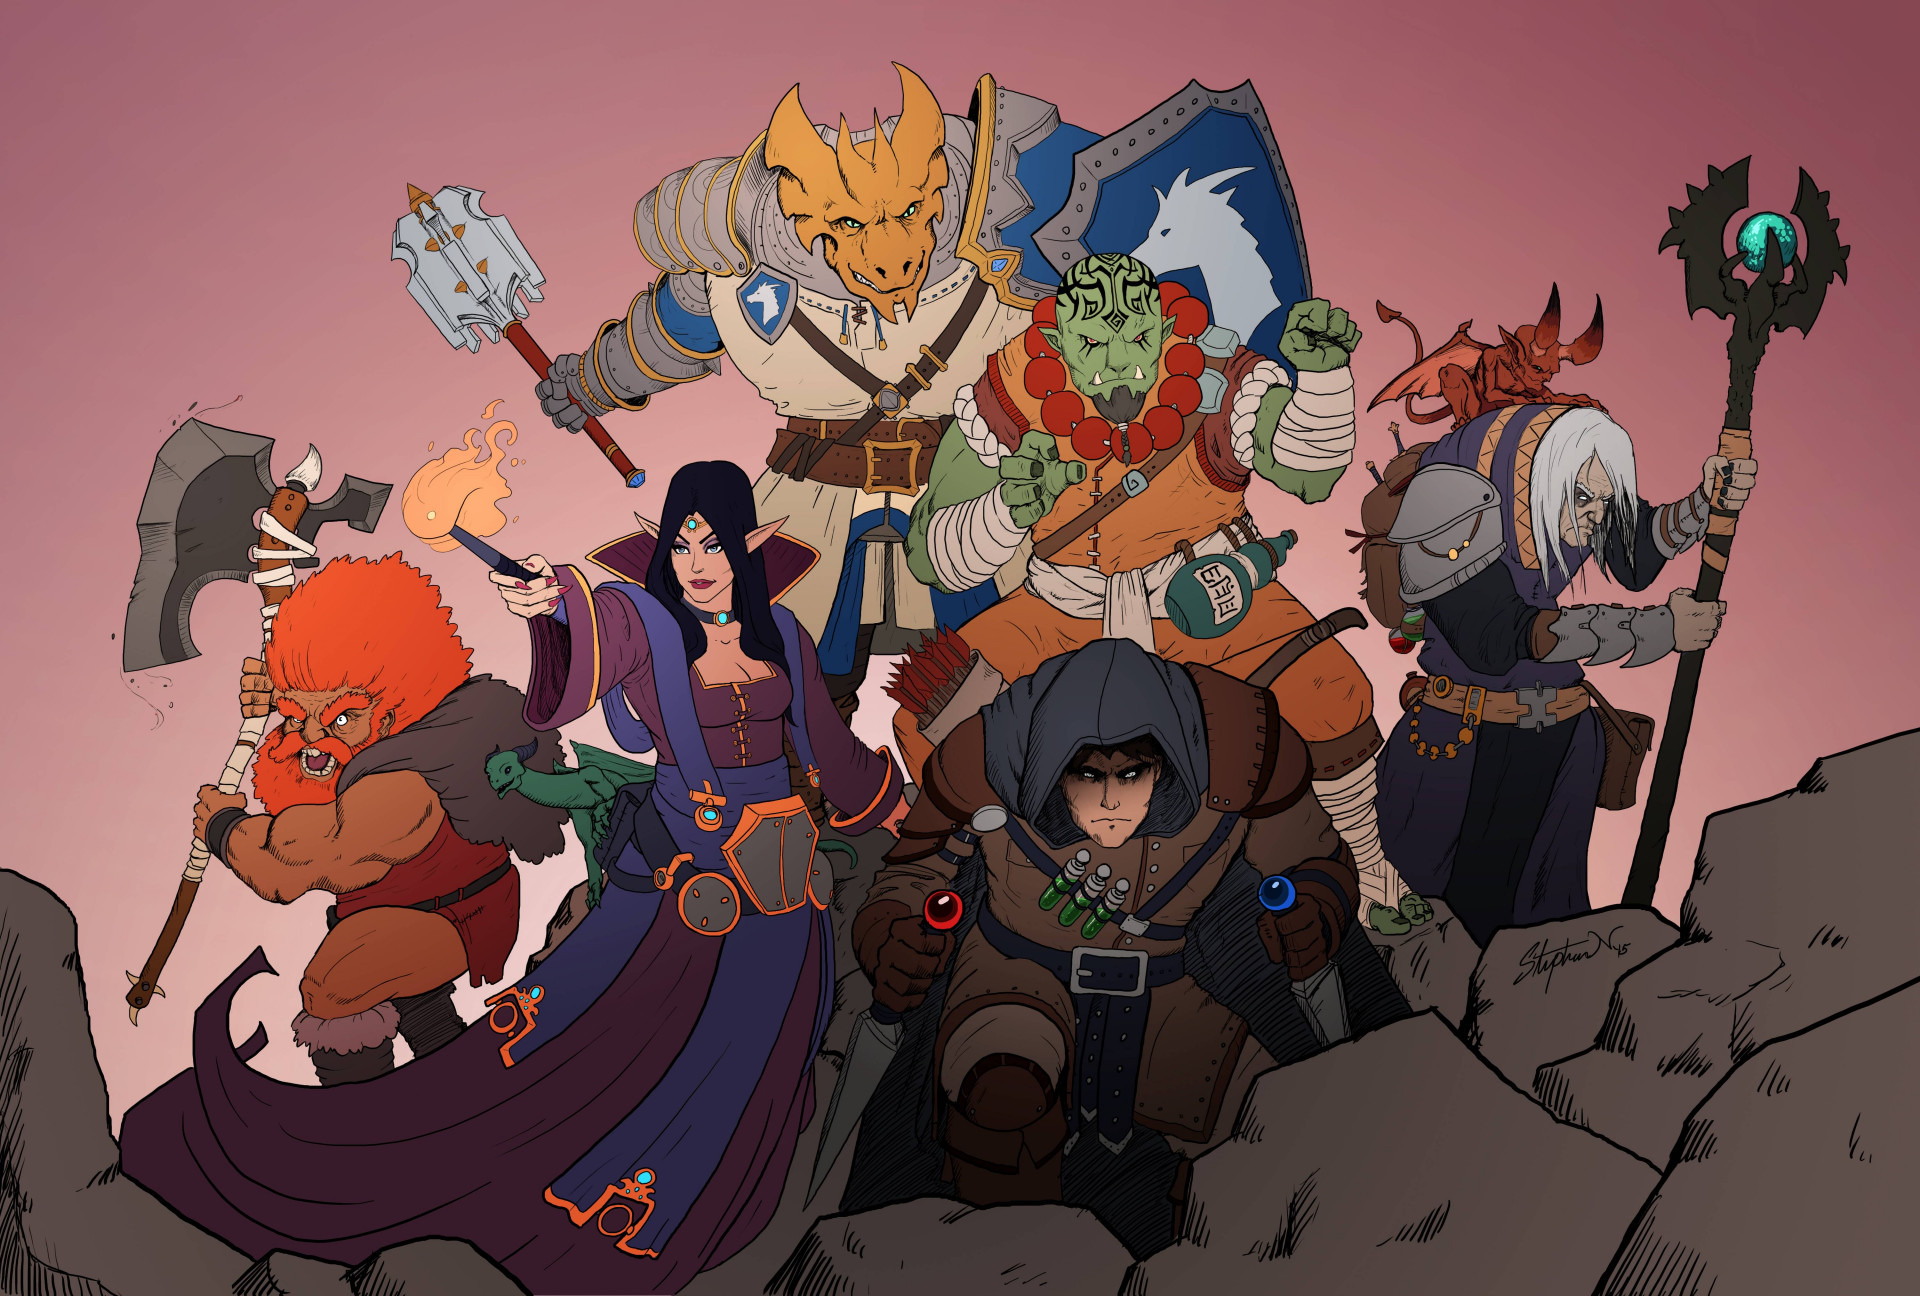 A classic D&D party stands at the ready. The dwarf has really orange hair. Like, really orange.